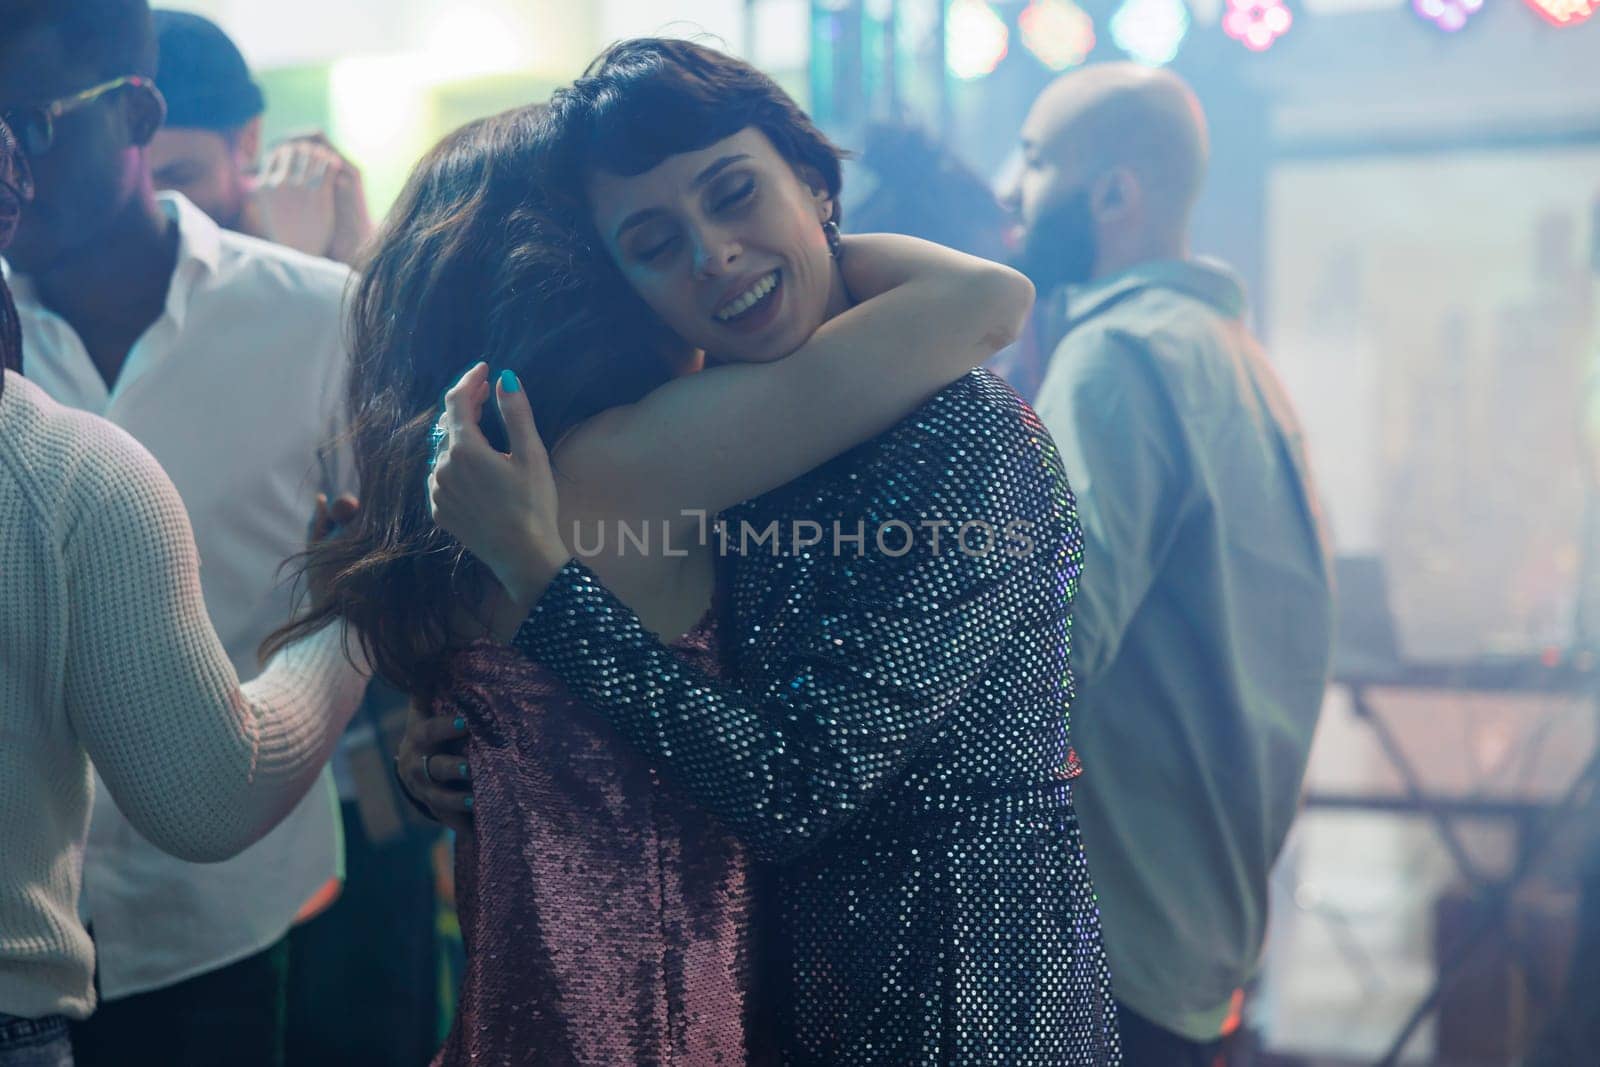 Young women hugging and dancing while attending disco party in nightclub. Romantic girlfriends couple embracing on dancefloor while clubbing and relaxing at discotheque event in club